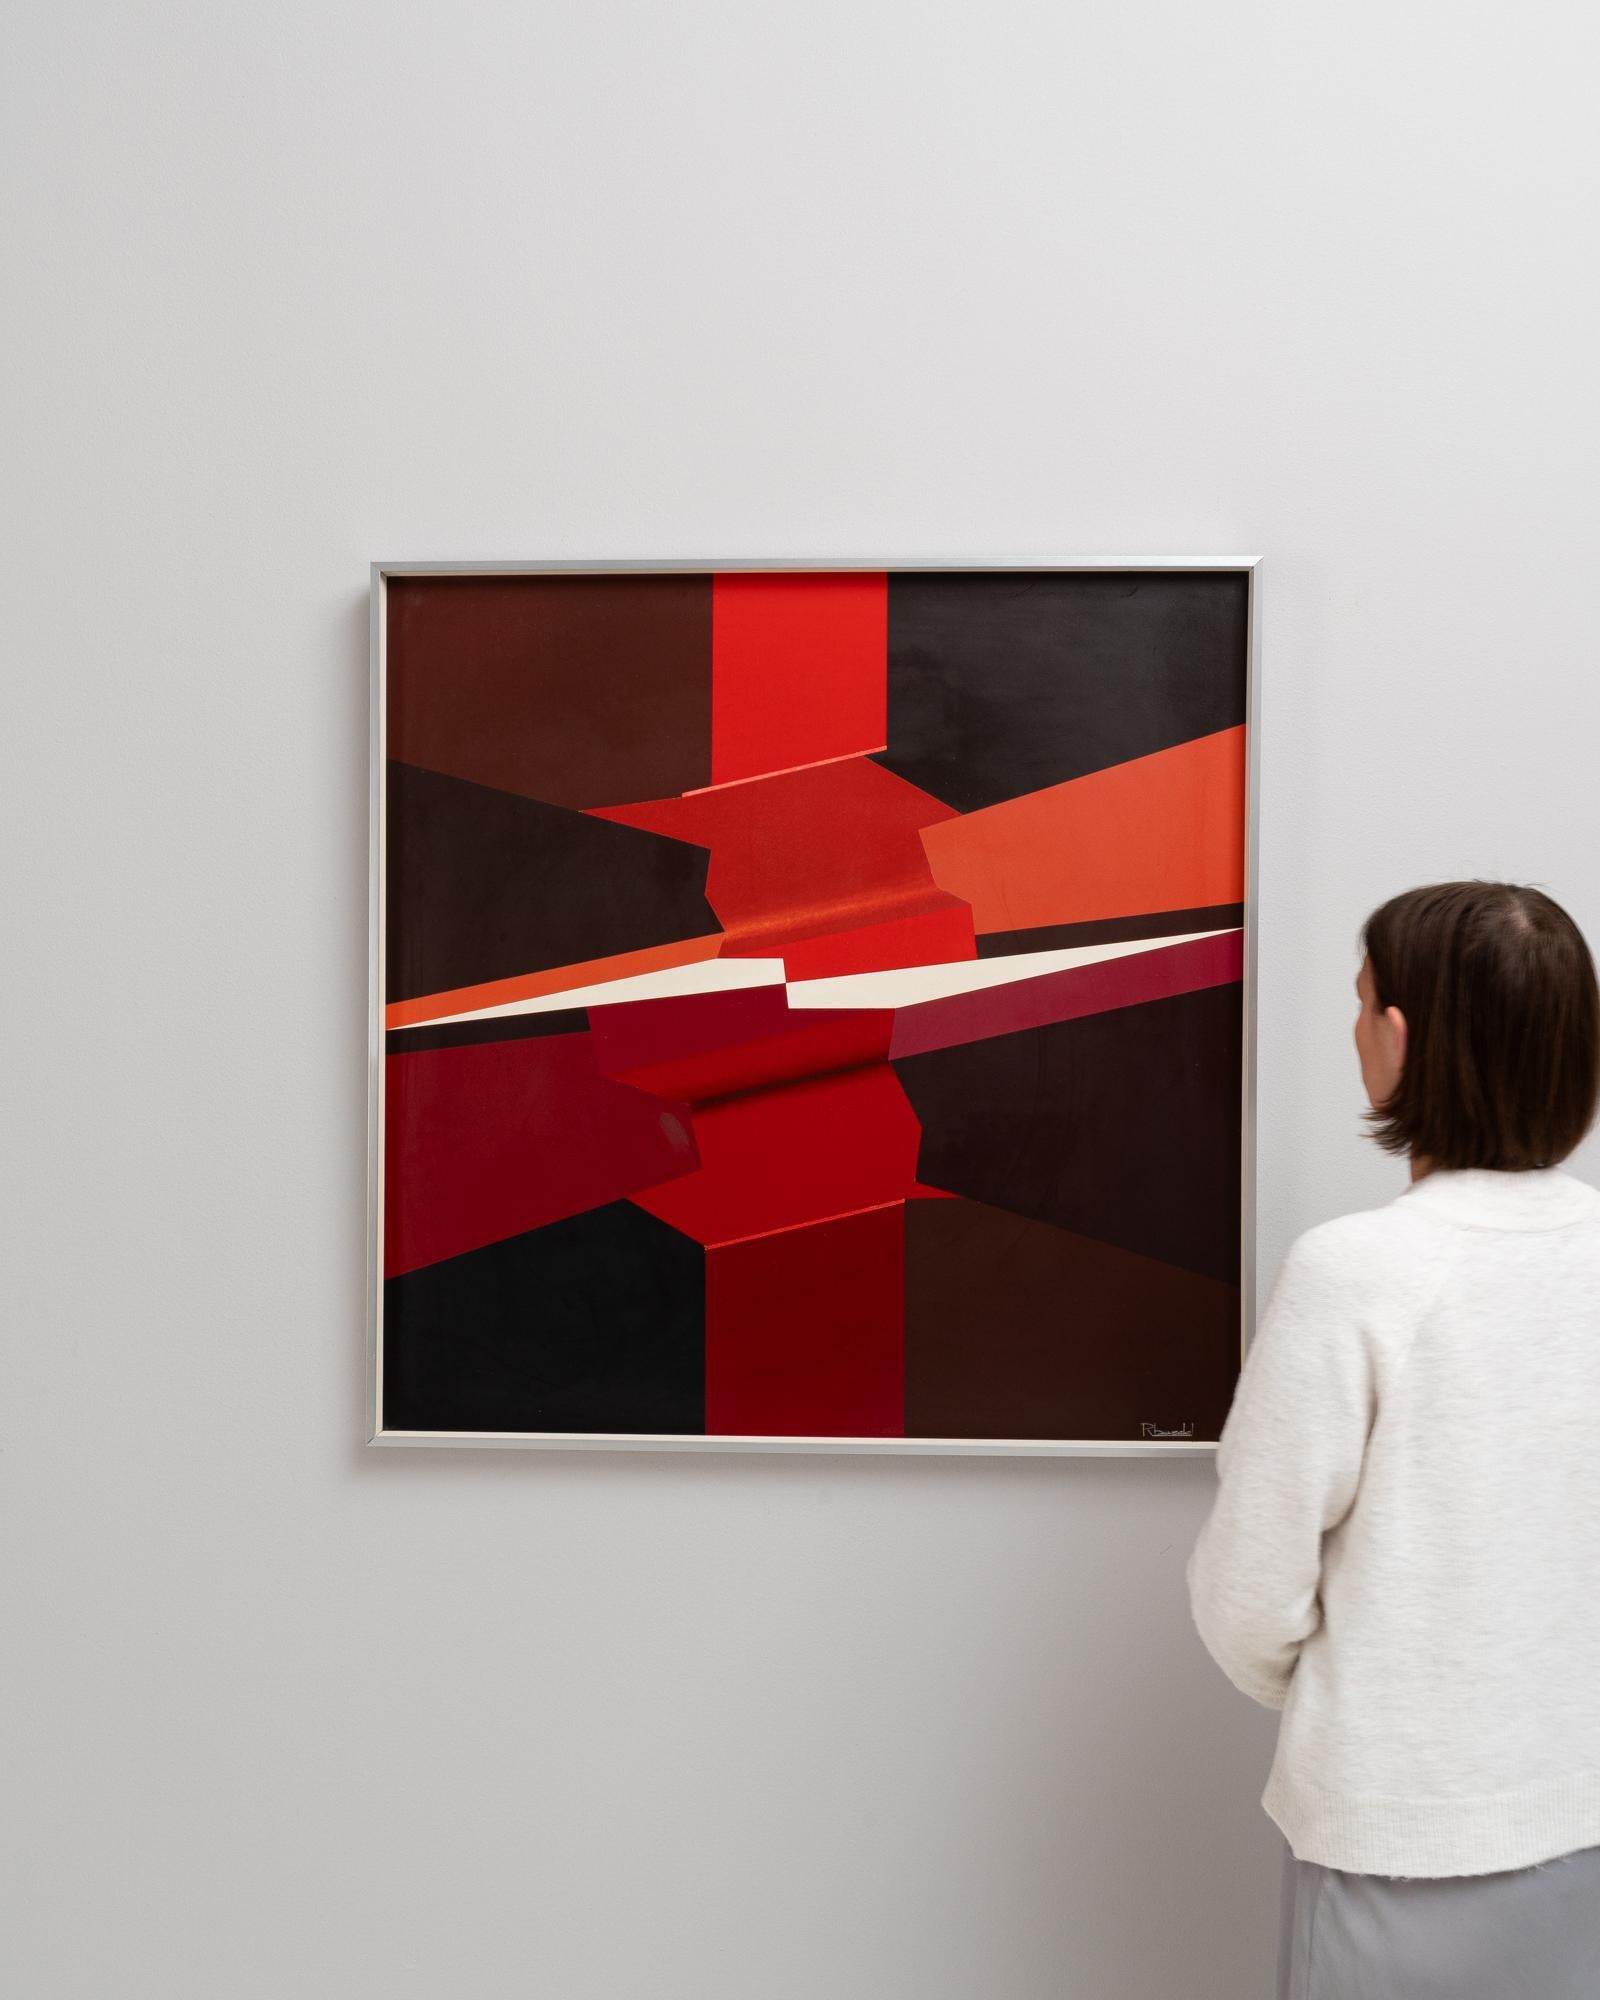 This powerful 20th Century Belgian Artwork by Rene Berdal is an homage to the bold and impactful style of geometric abstraction. Enclosed in a minimalistic metal frame, the composition presents a cascade of angular forms and intersecting planes,